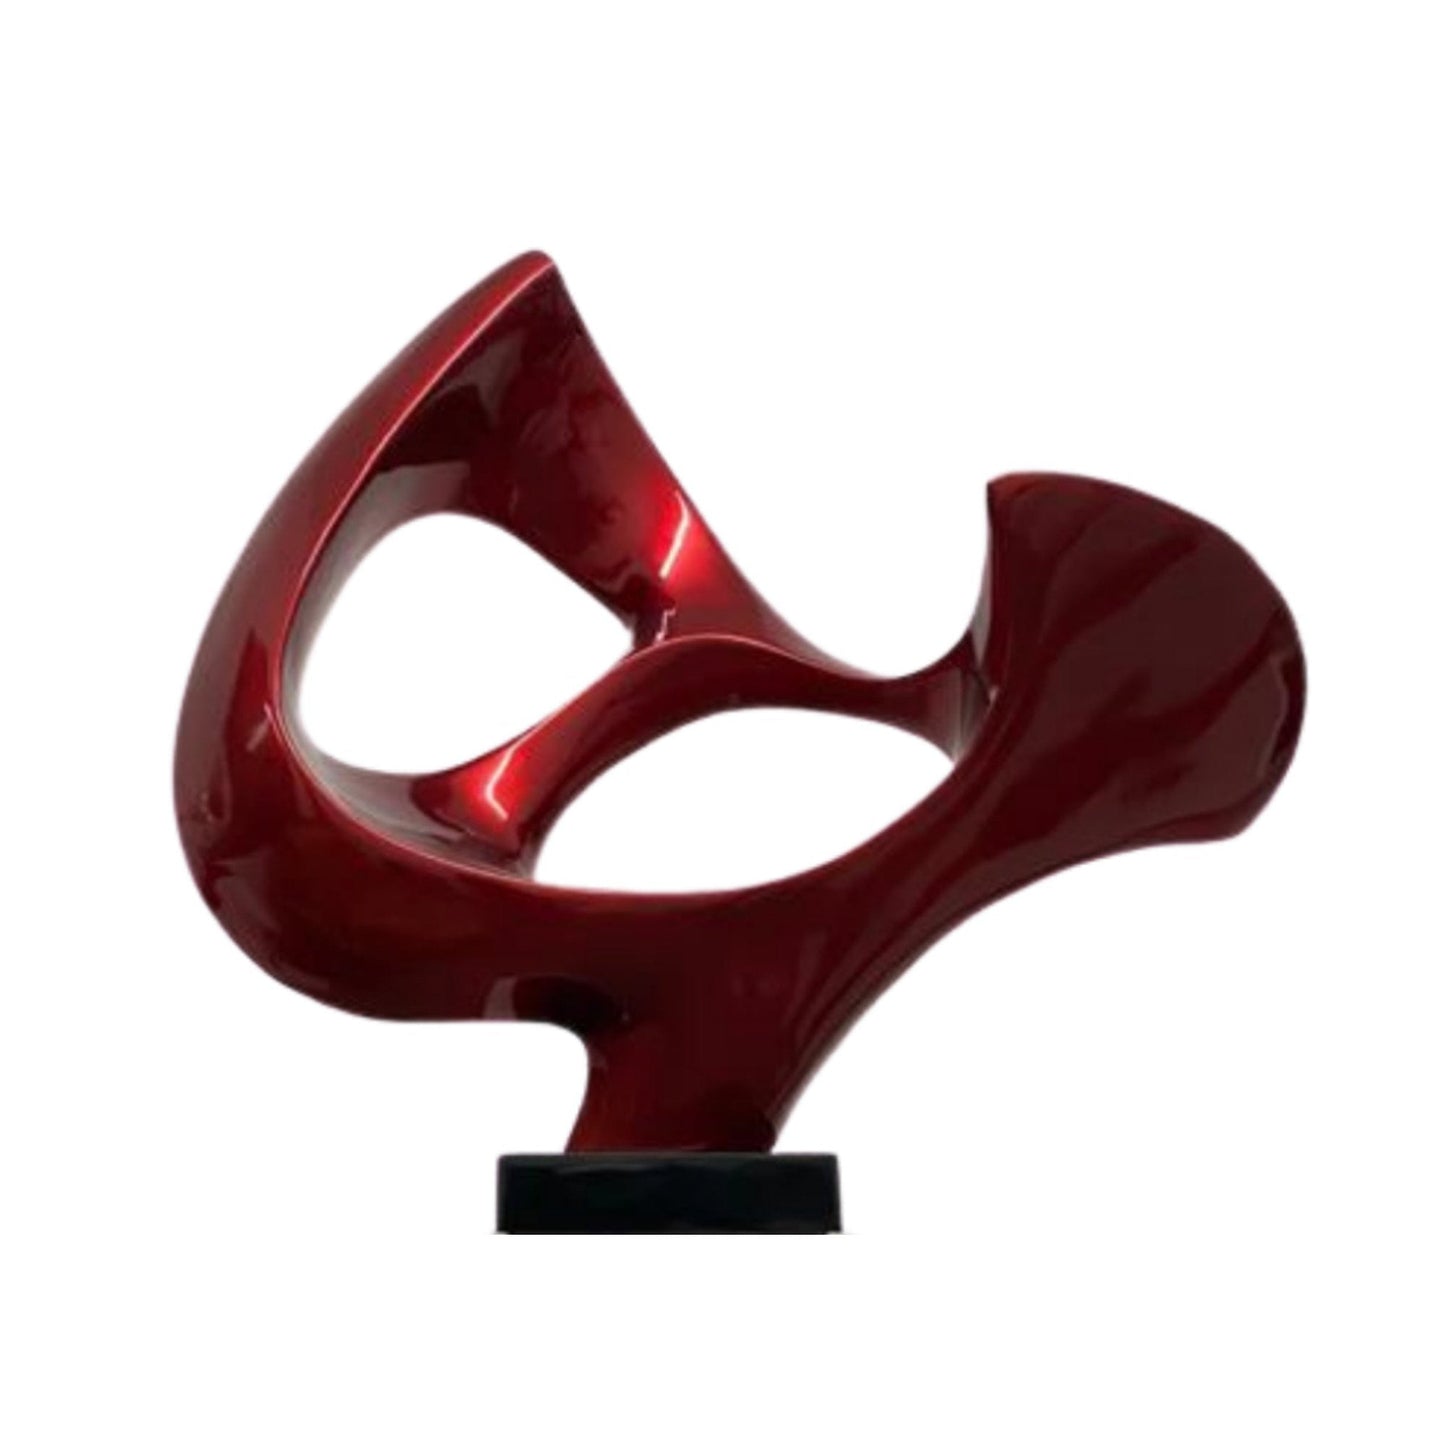 SHIVA 54" Metallic Red Abstract Mask Floor Sculpture With Black Stand